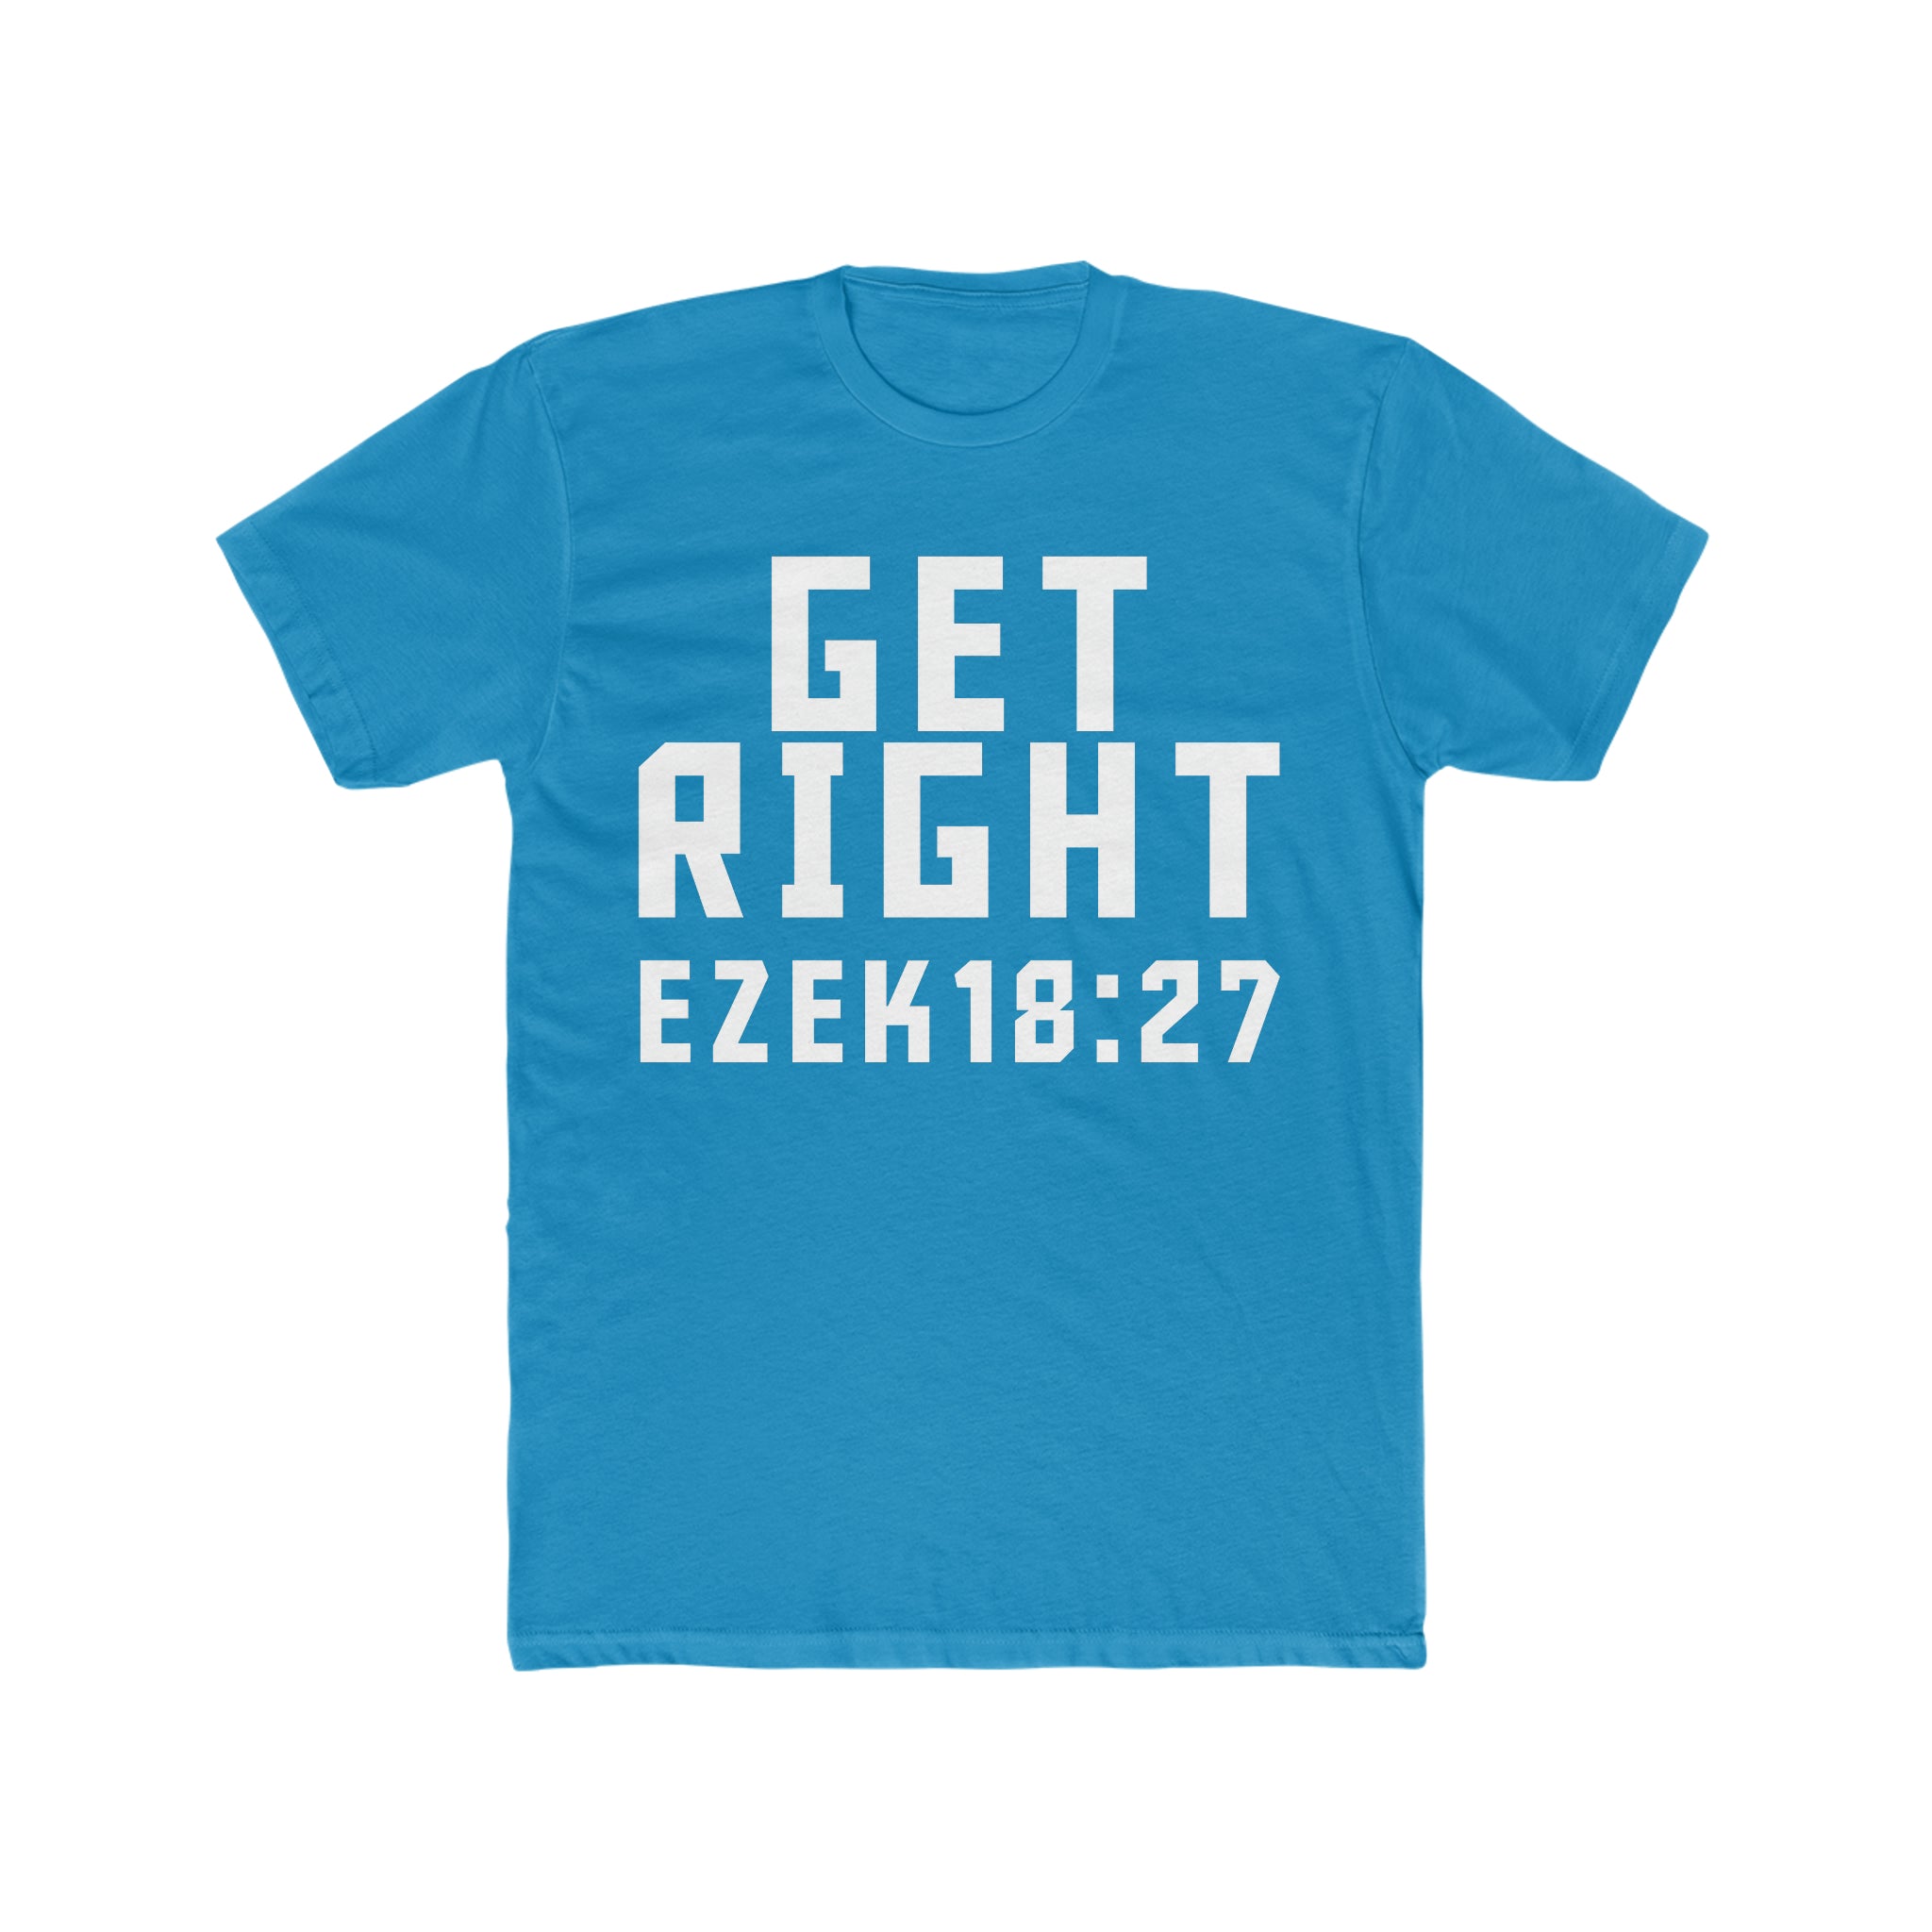 GET RIGHT TEE